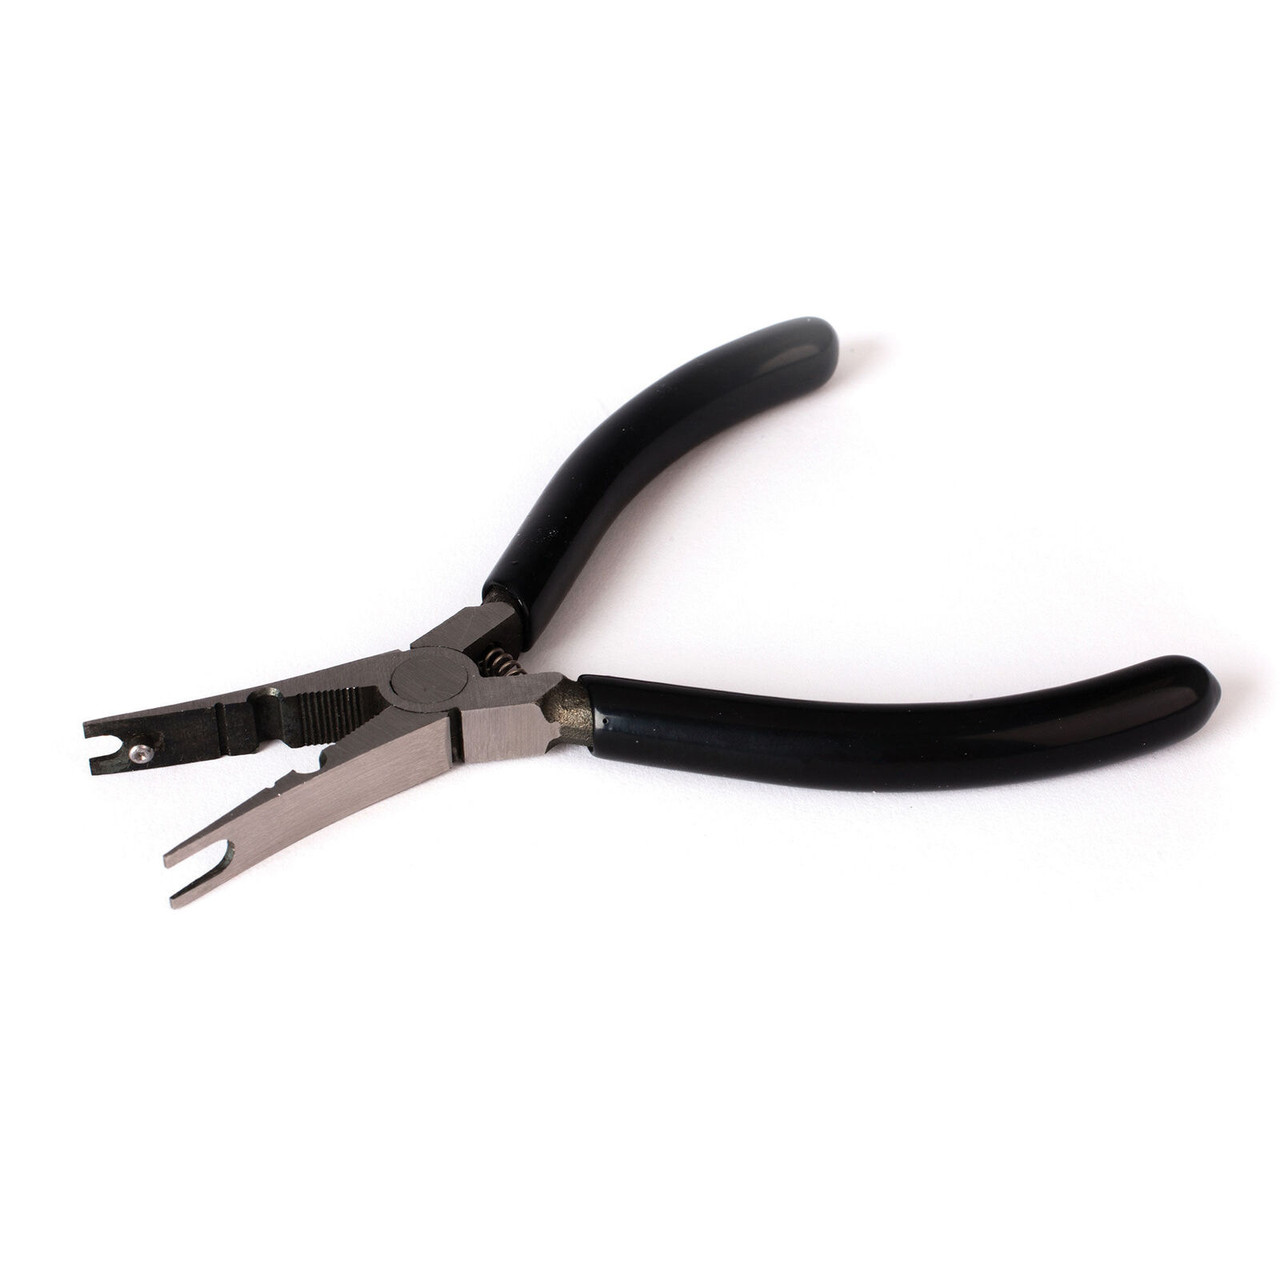 Blade 100 Deluxe Ball Link Pliers: All